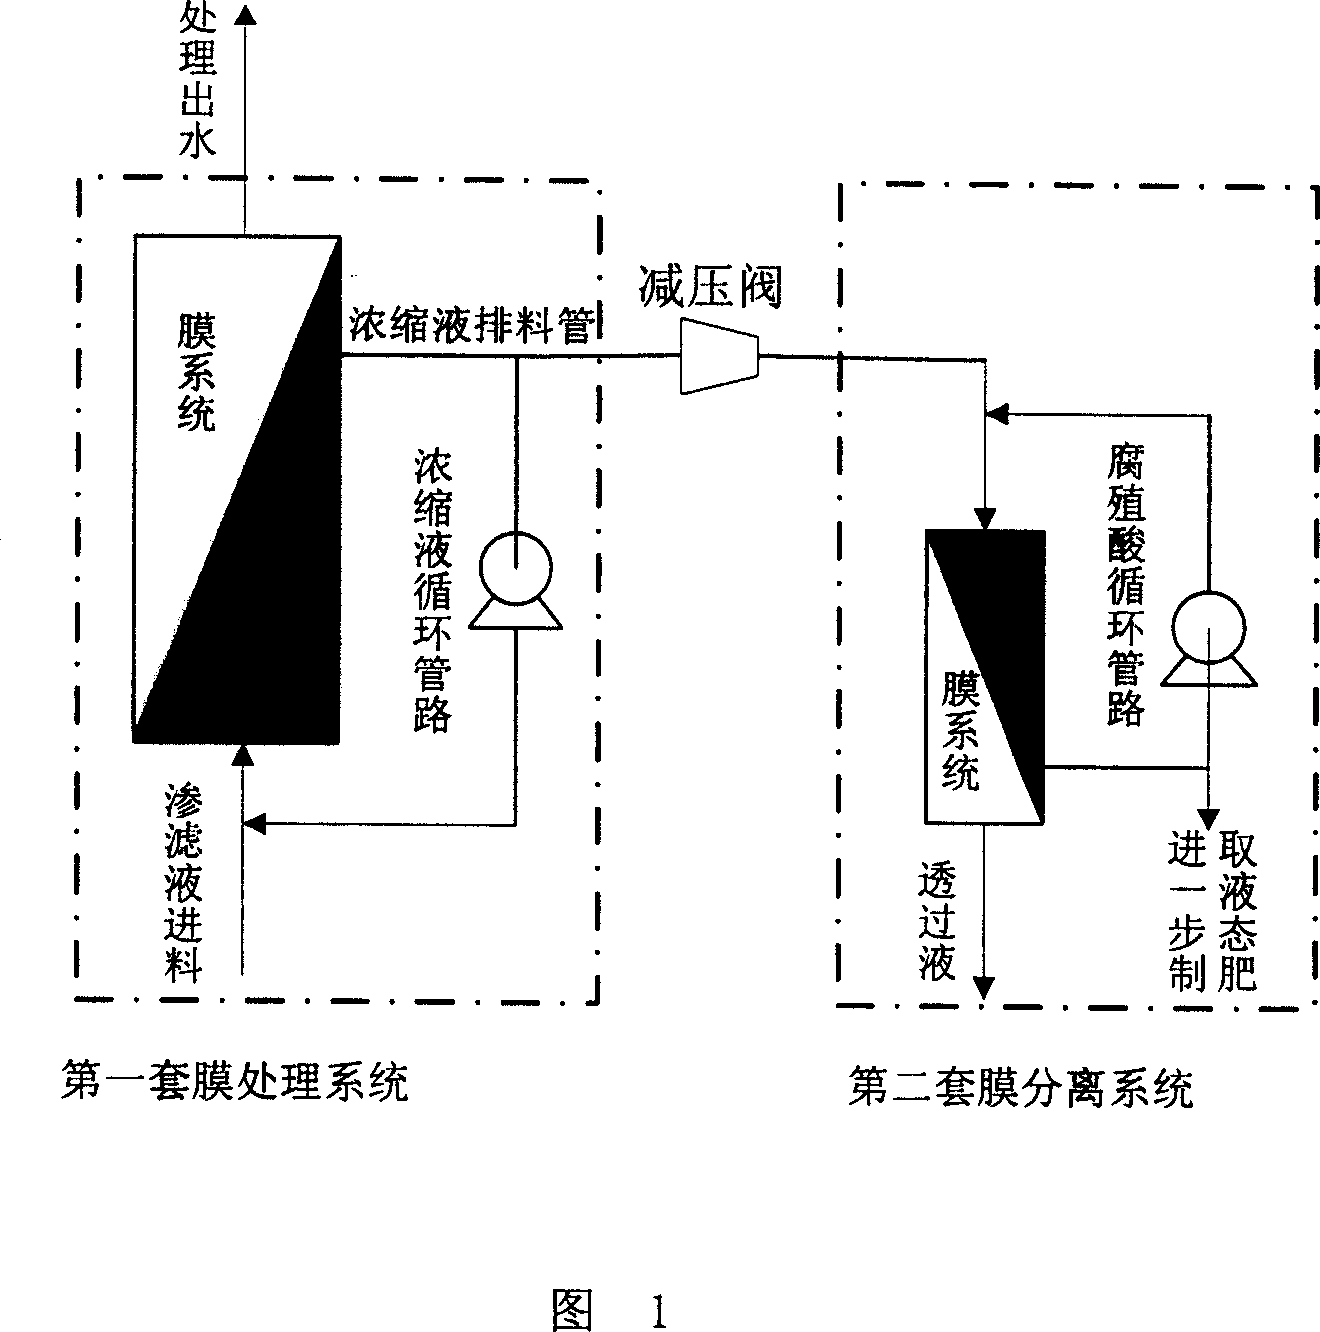 Method of extracting humic acids from rubbish percolation liquid membrane process concentrated liquid